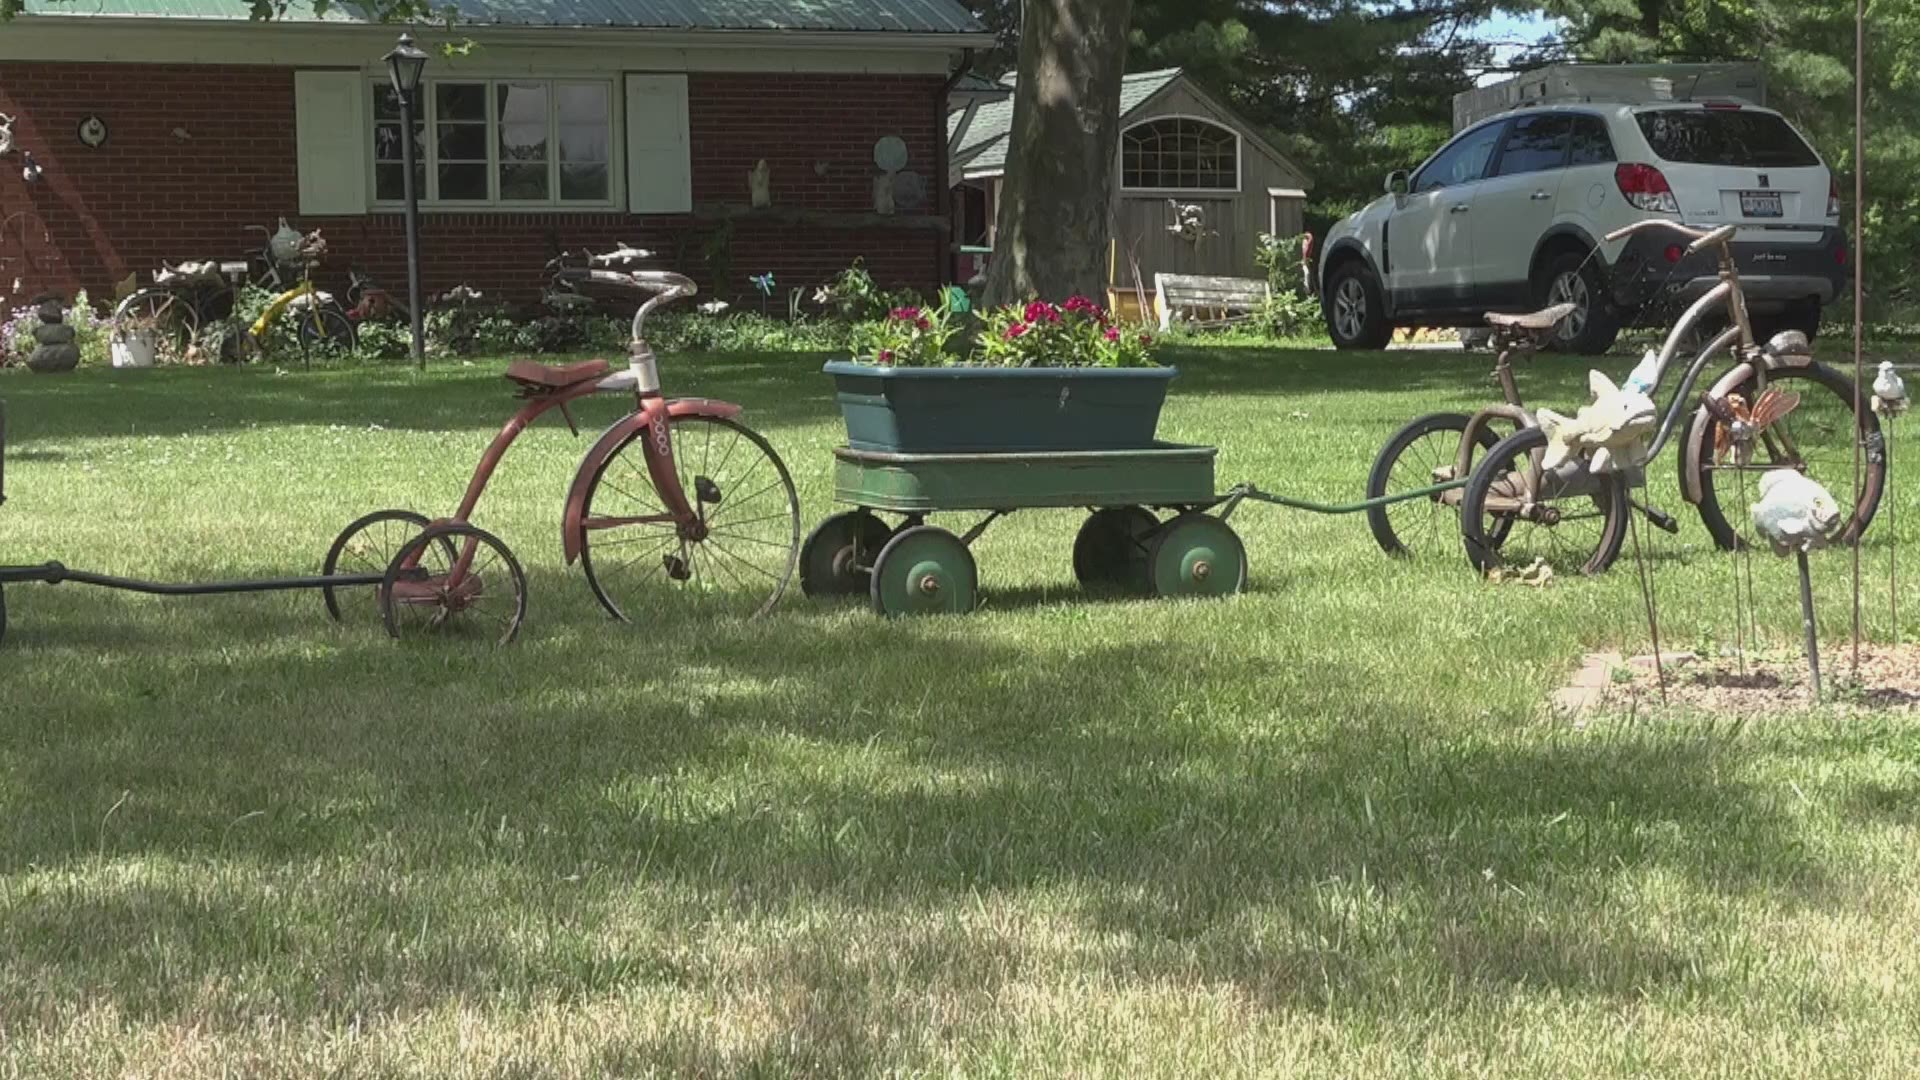 An Oak Harbor couple's yard art keeps thoughts turning to childhoods of yesteryear, as a collection of trikes dots their lawn.